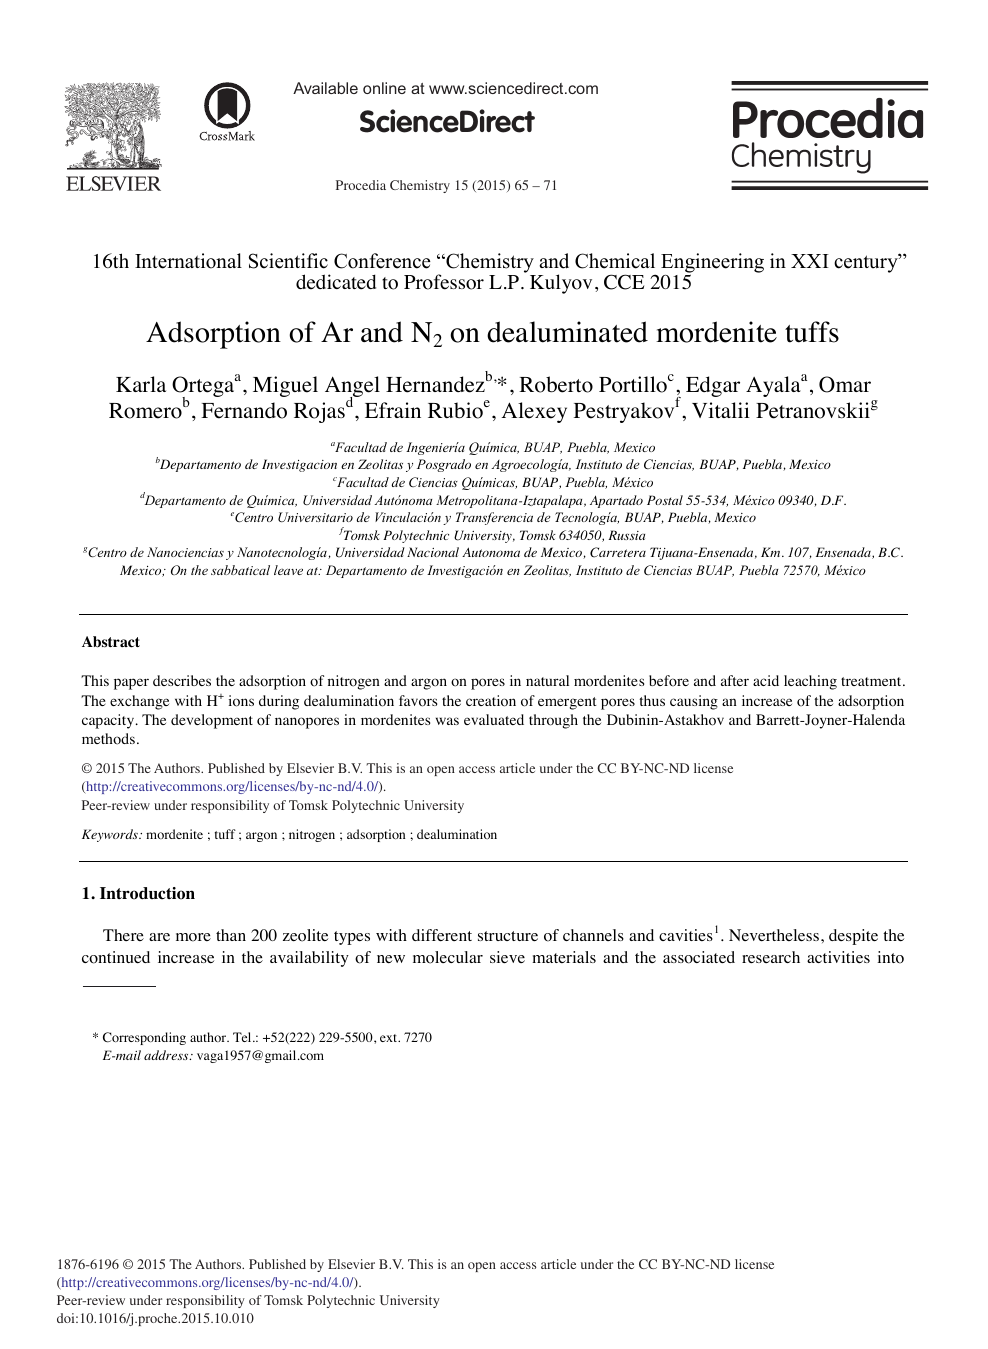 Adsorption Of Ar And N2 On Dealuminated Mordenite Tuffs Topic Of Research Paper In Materials Engineering Download Scholarly Article Pdf And Read For Free On Cyberleninka Open Science Hub